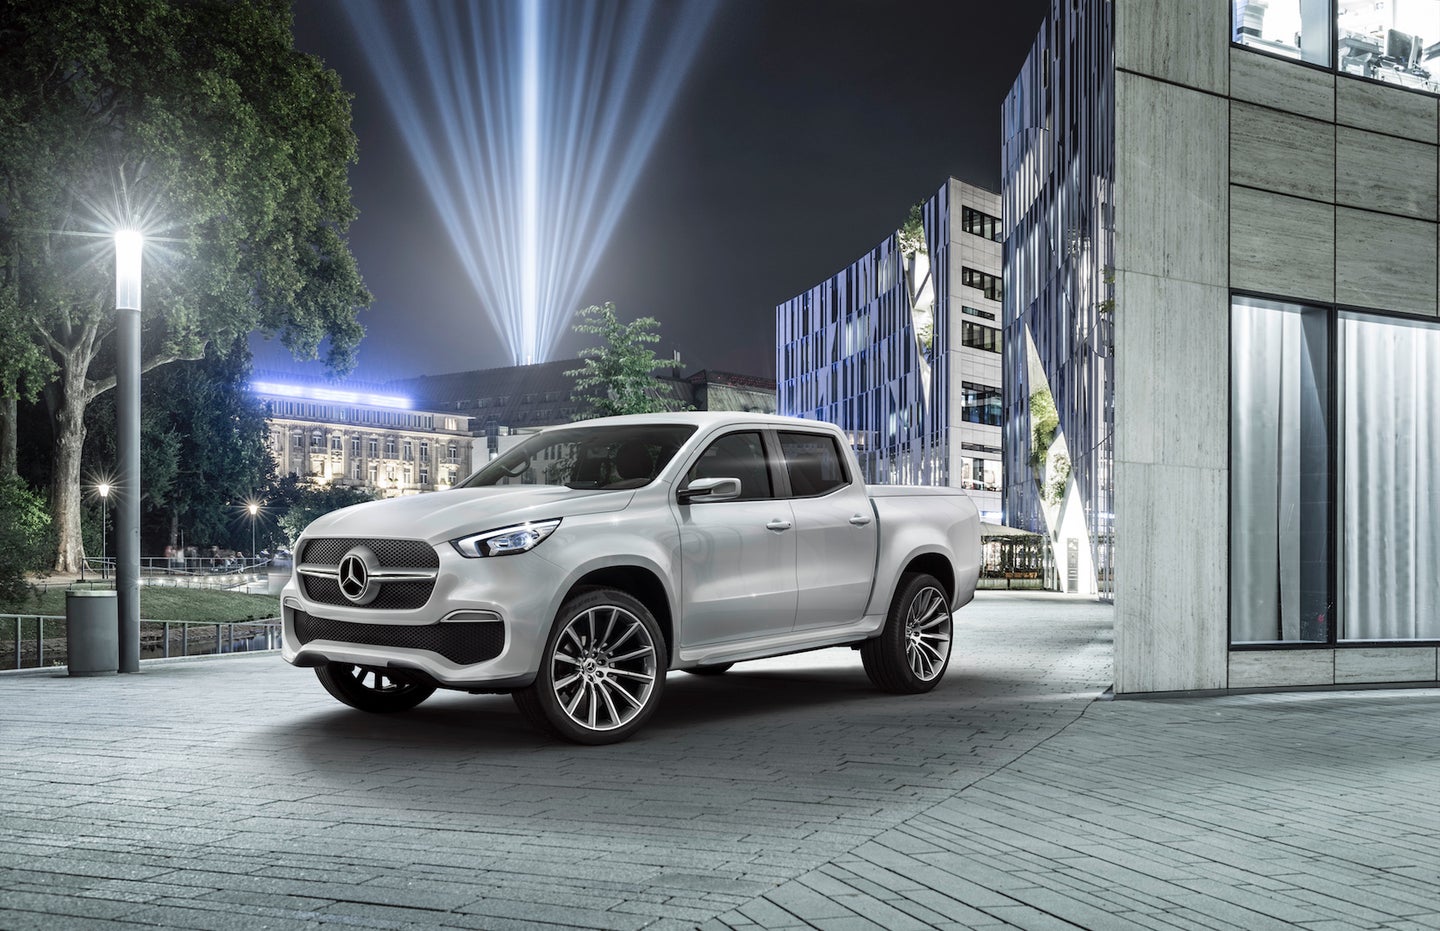 Mercedes Explains Why the X-Class Pickup Won’t Come to US